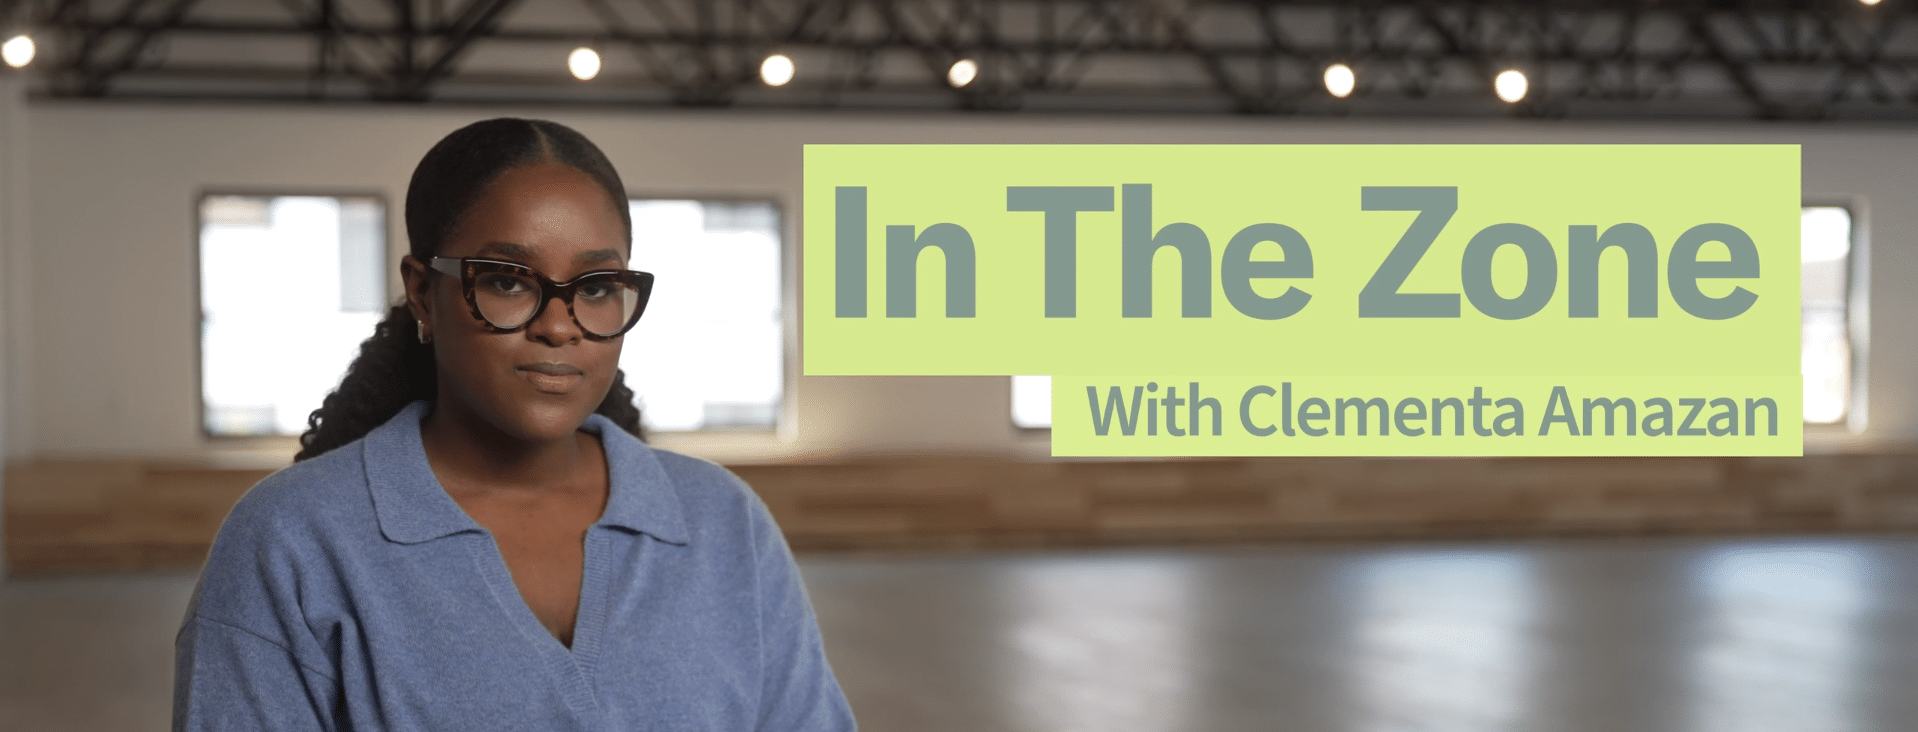 In the Zone with Clementa Amazan – Episode 2